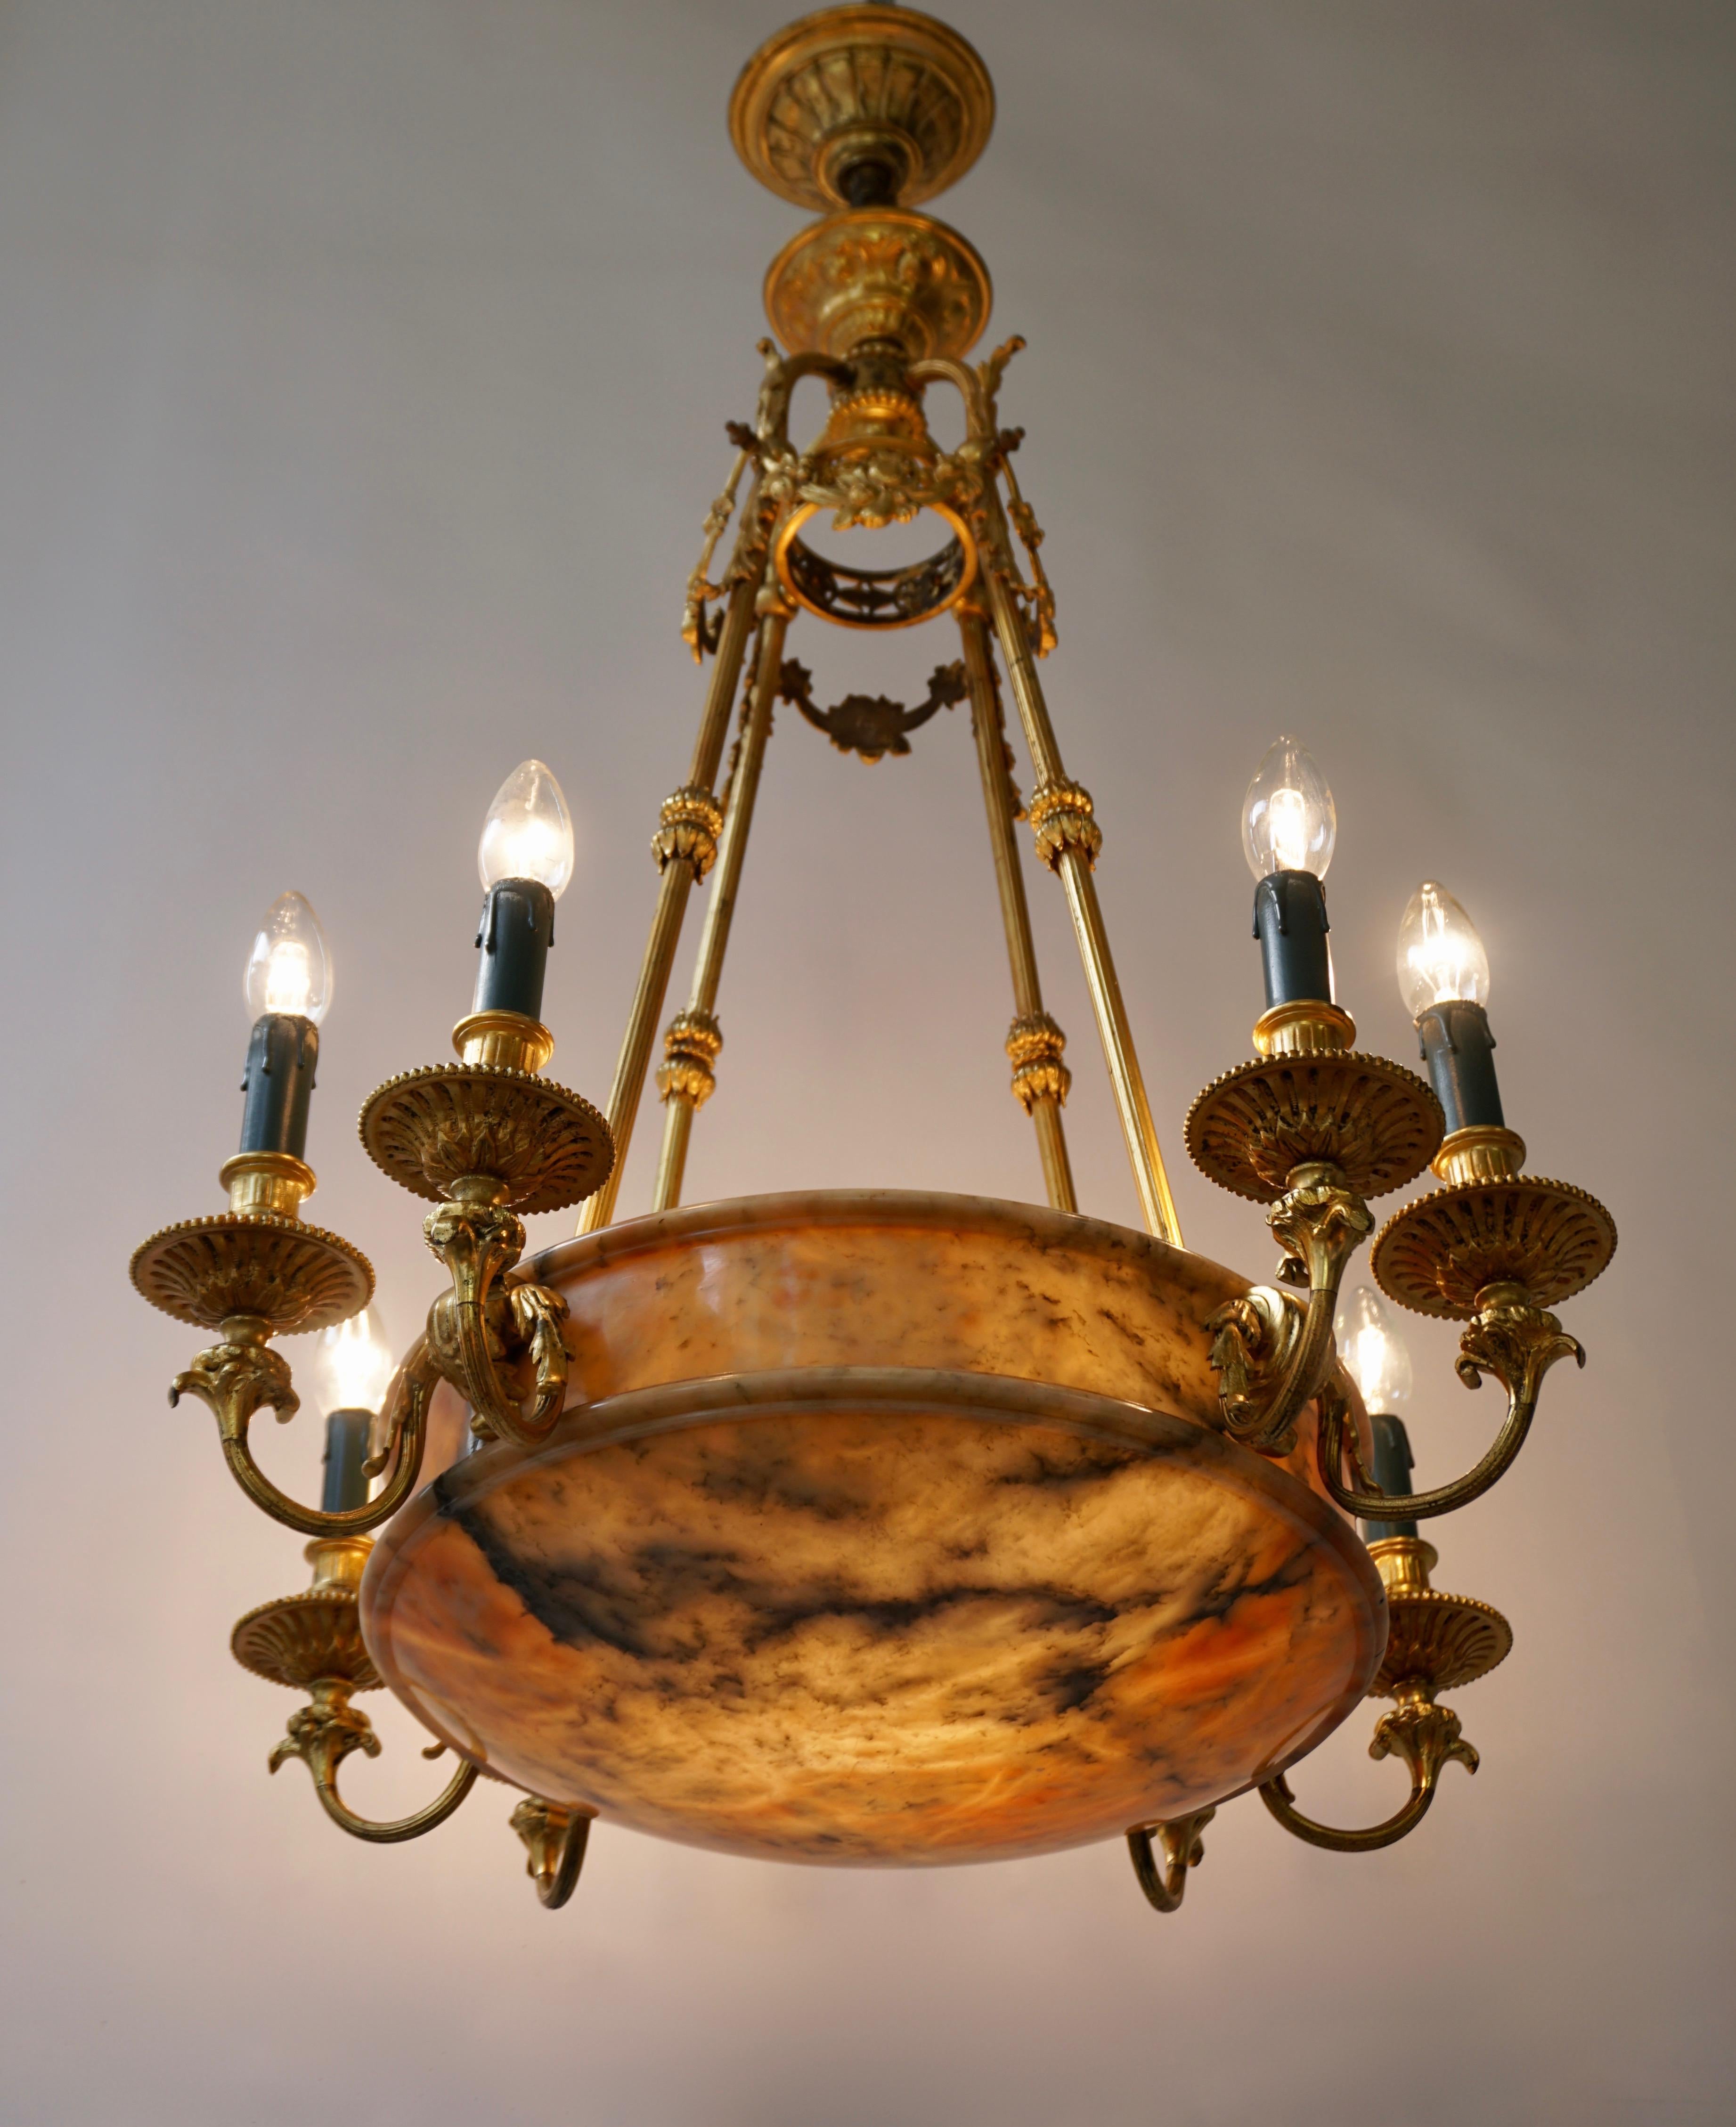 Rare Early French 20th Century Art Deco Bronze and Alabaster Chandelier For Sale 6